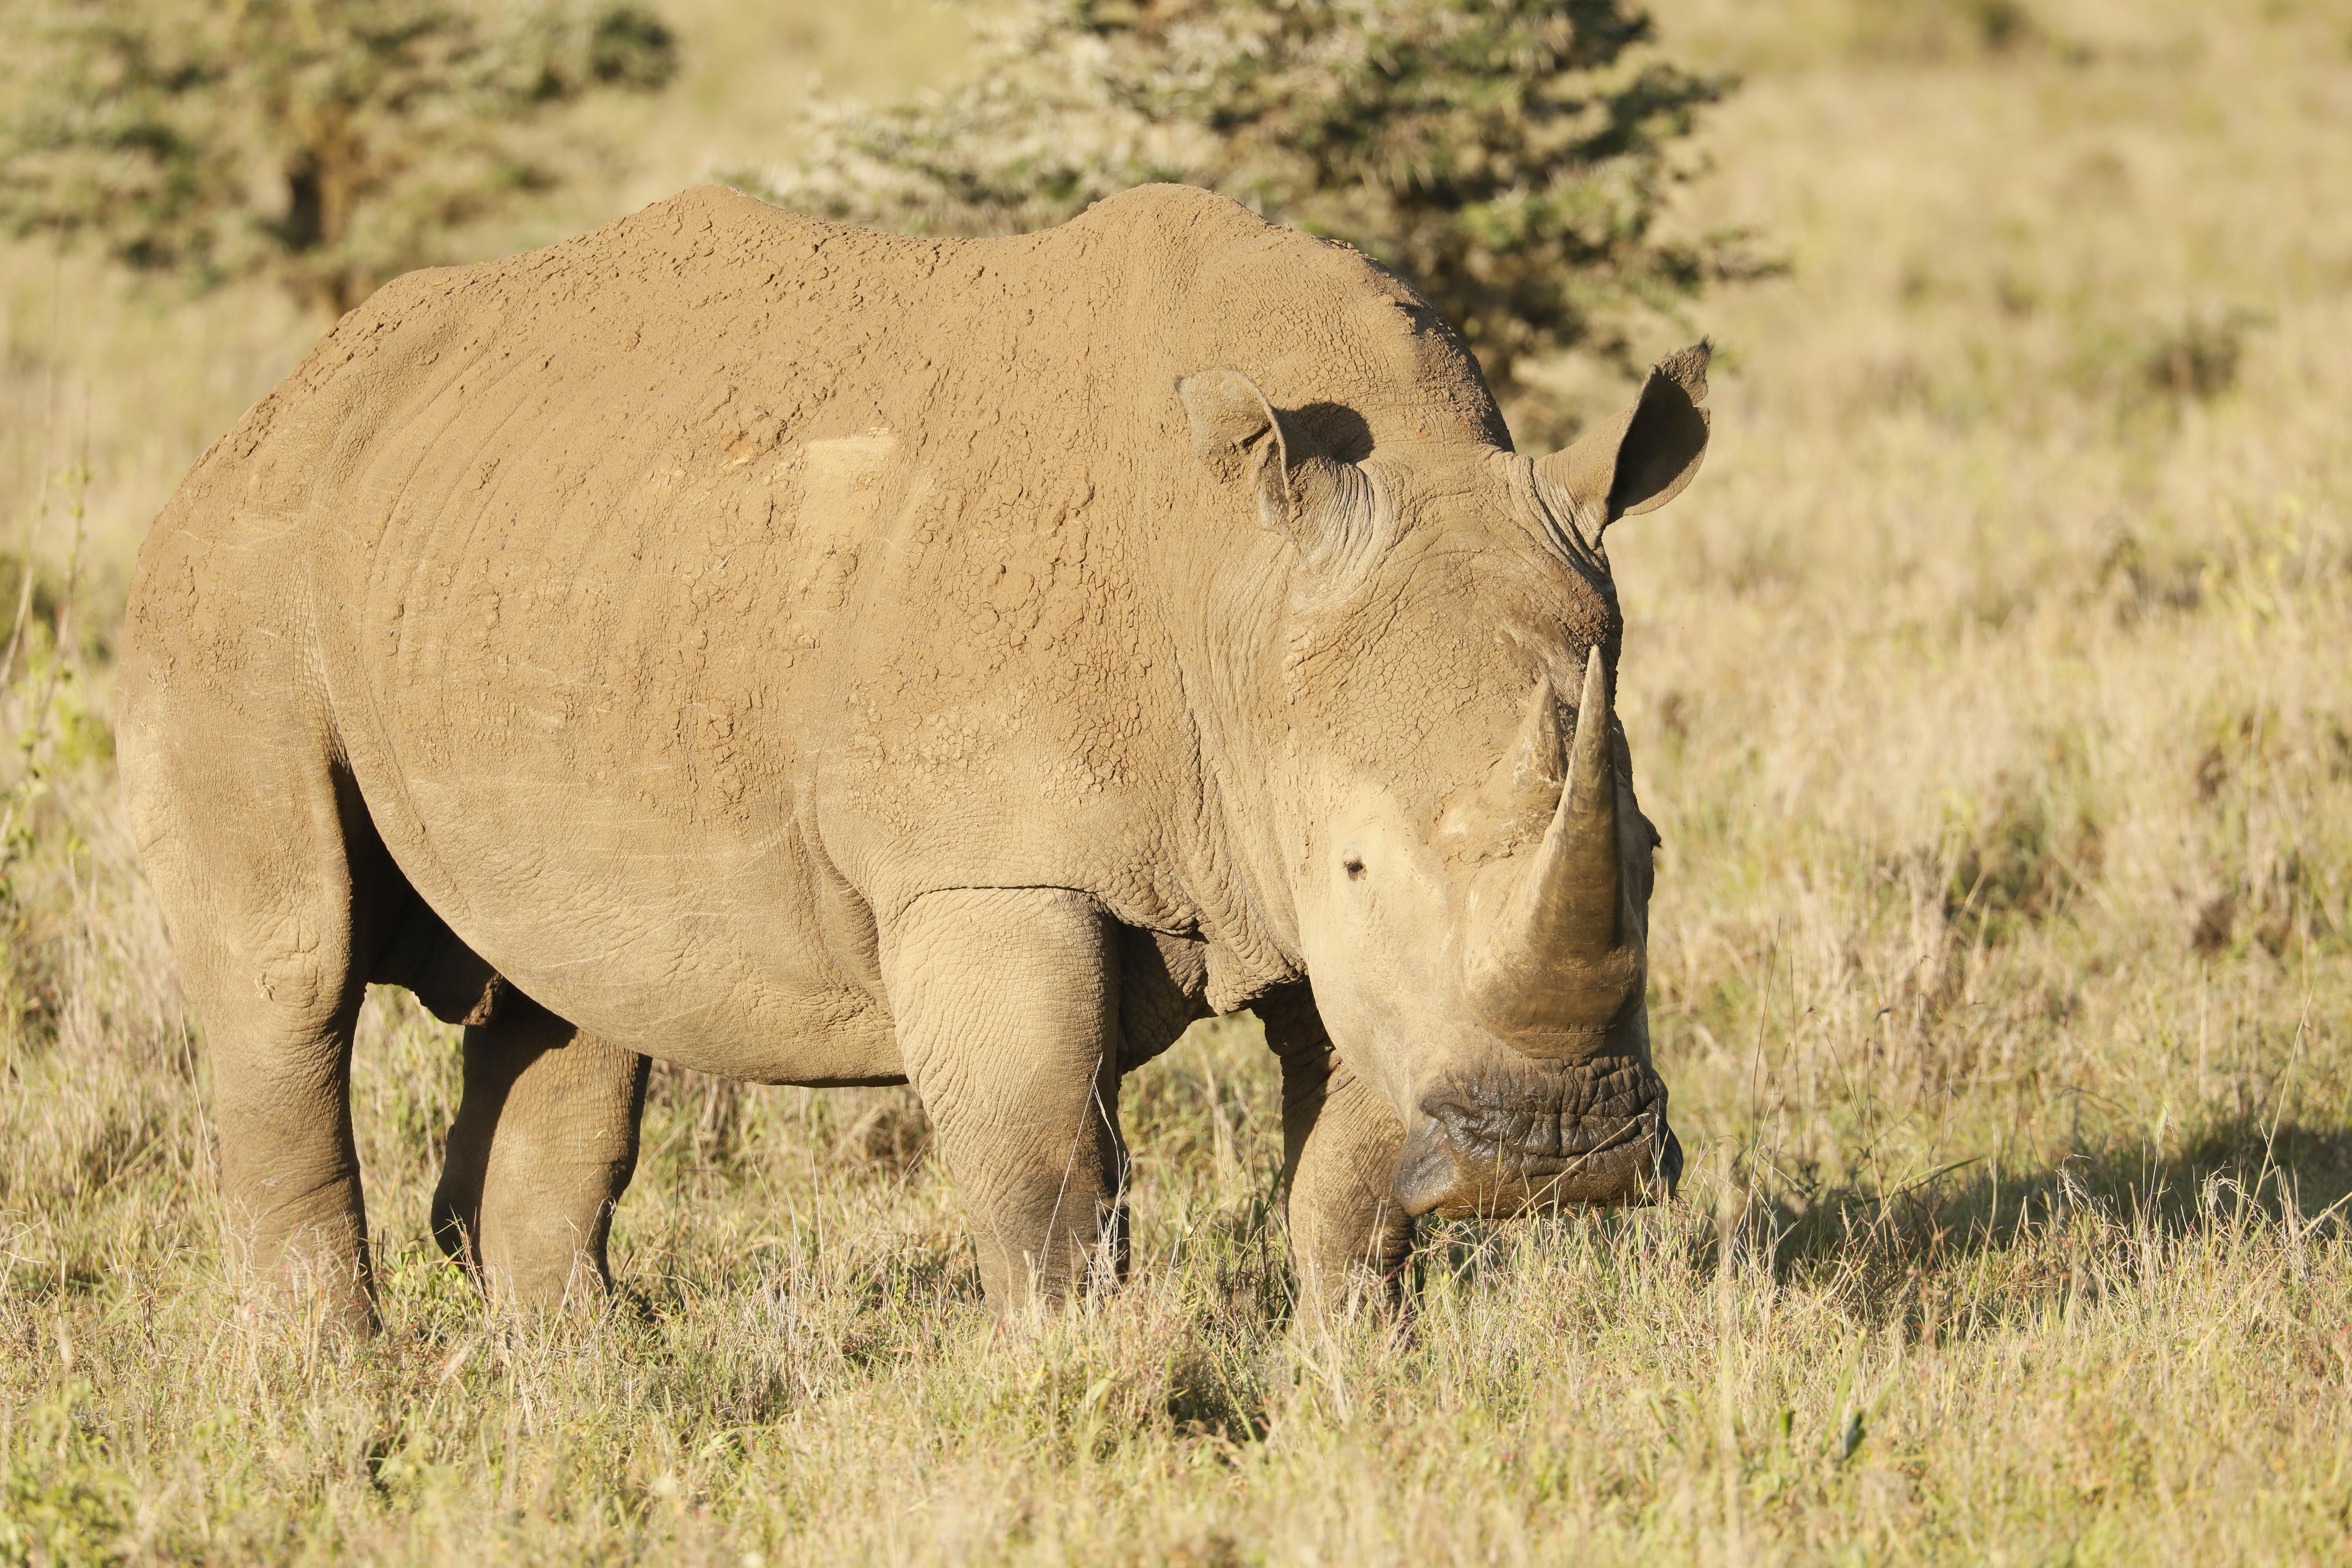 Development of Laikipia Rhino Range Expansion Management Plan and Implementation Strategy